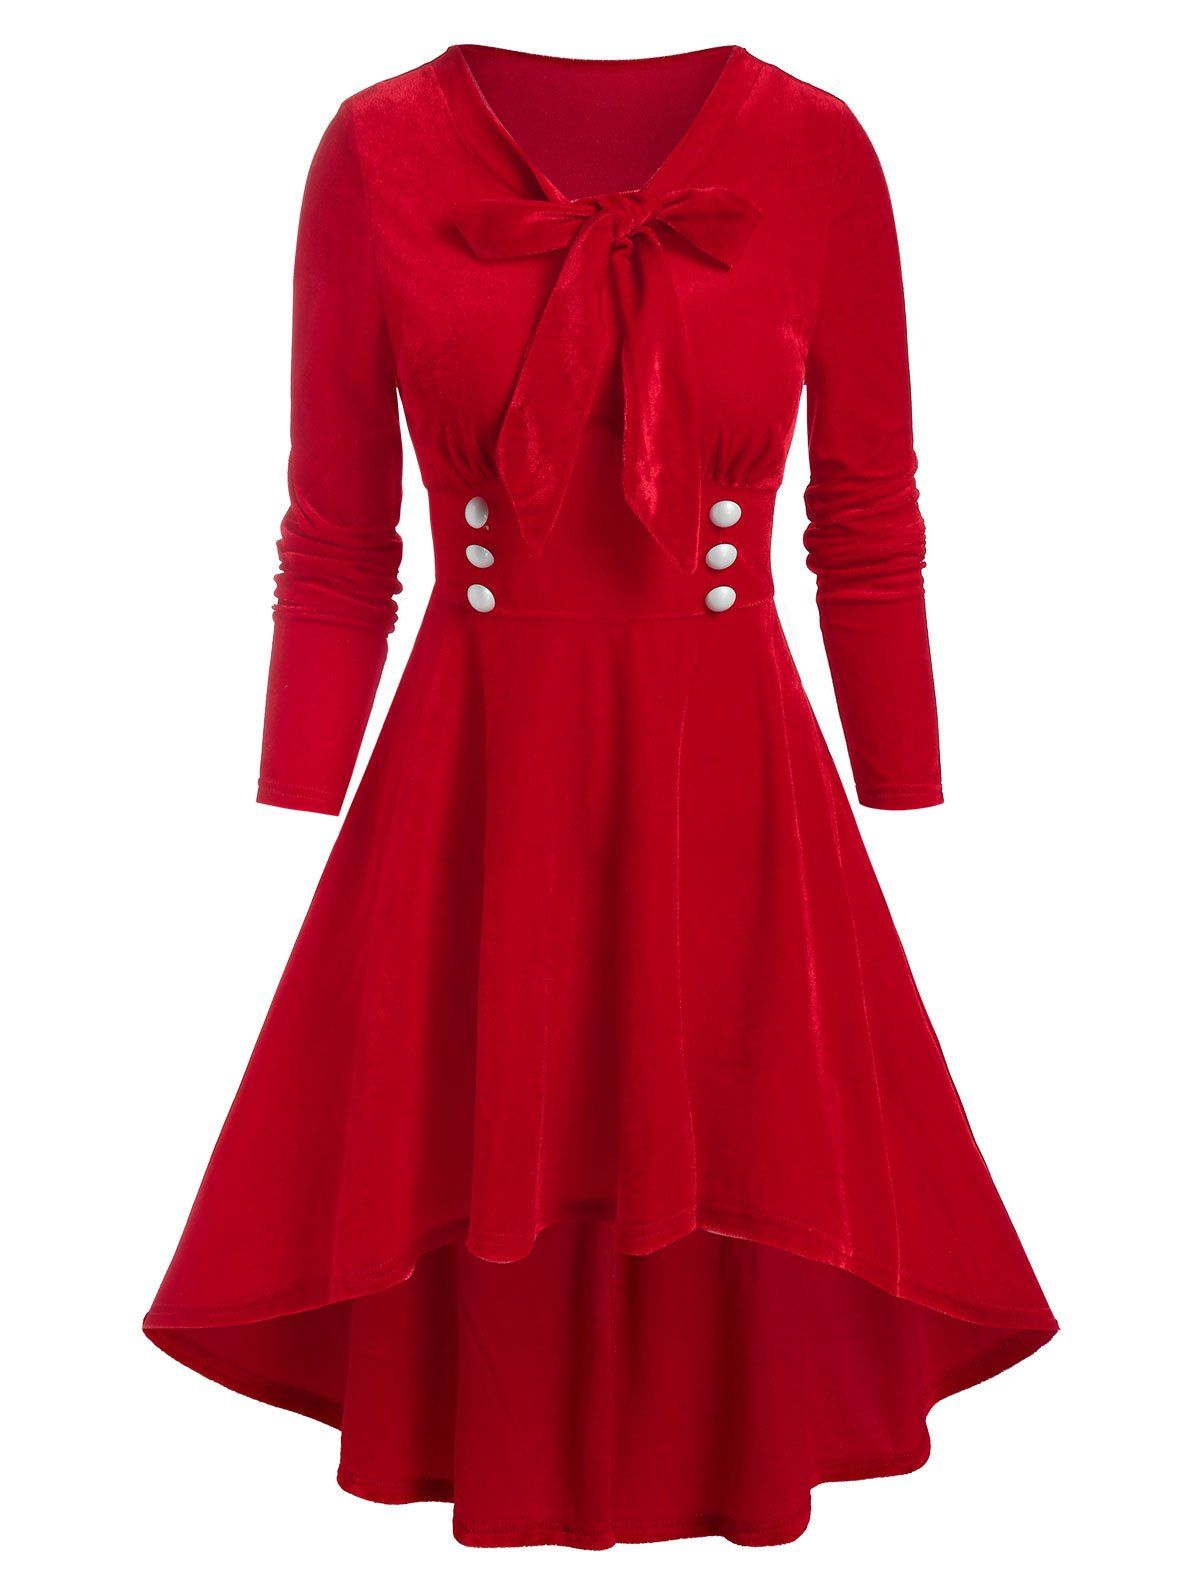 Tie Knot Mock Button High Low Velour Dress - RED XXL